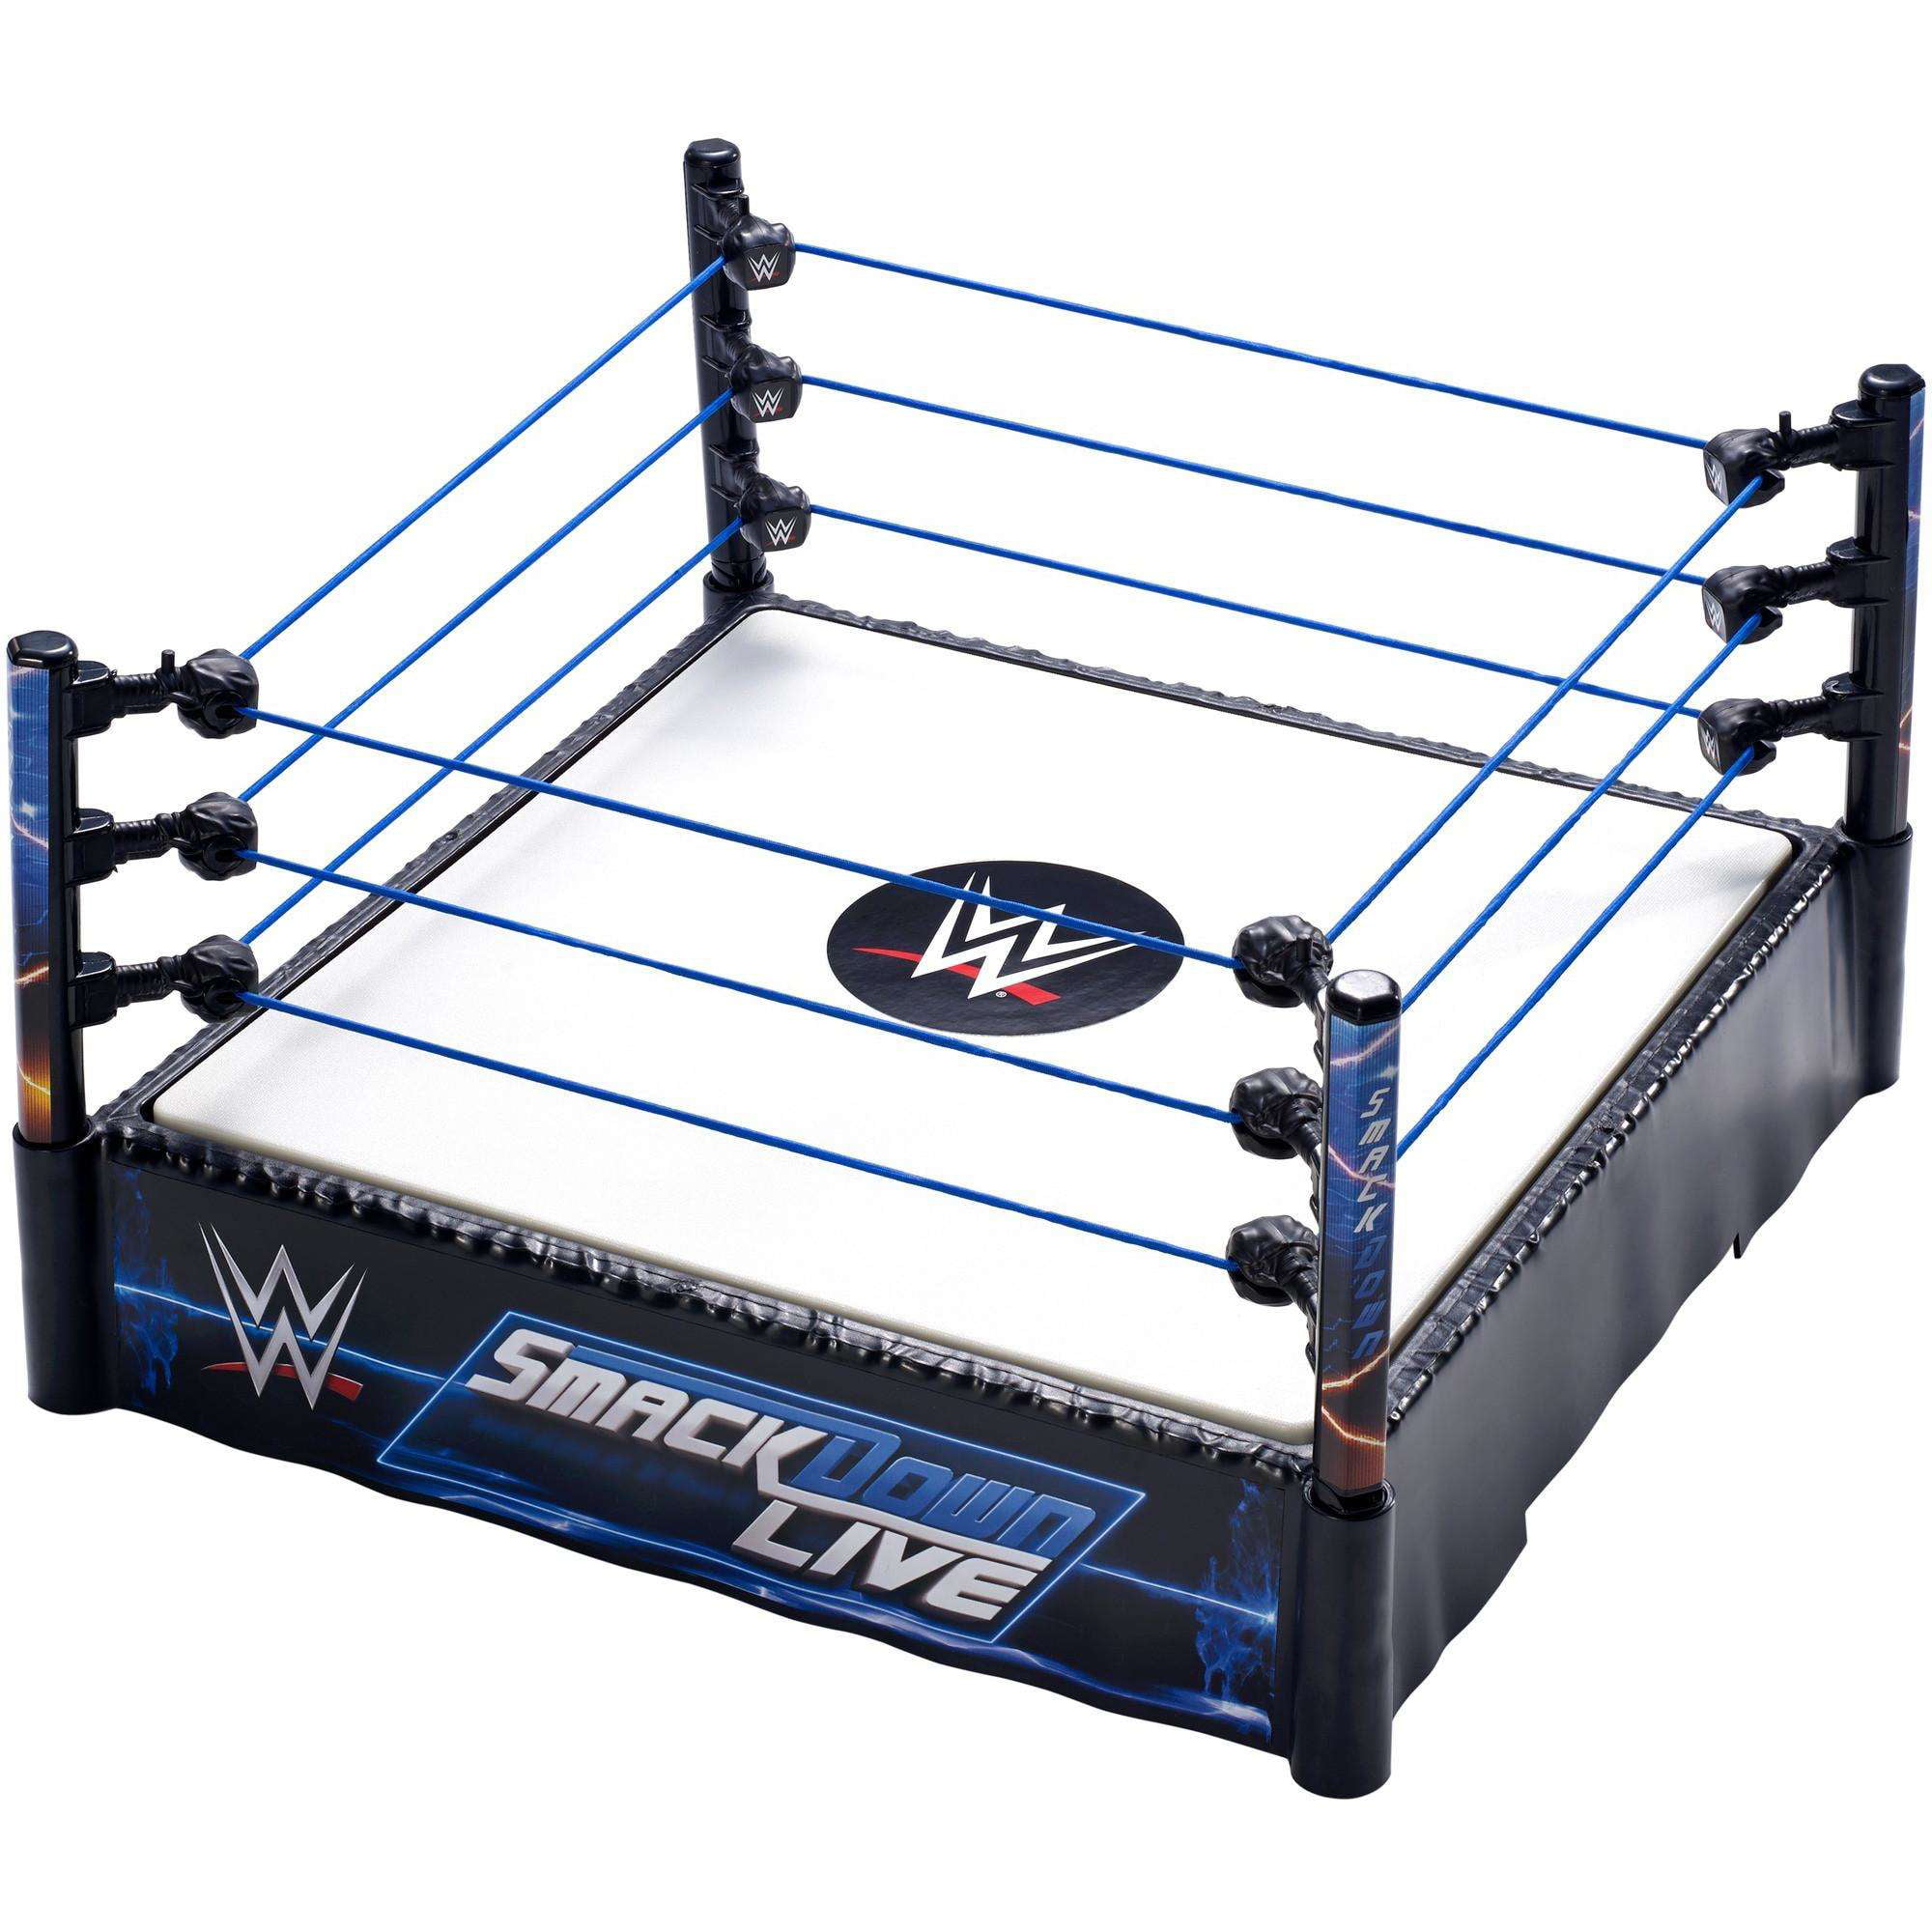 WWE Smackdown Live Wrestling Ring with Authentic Details